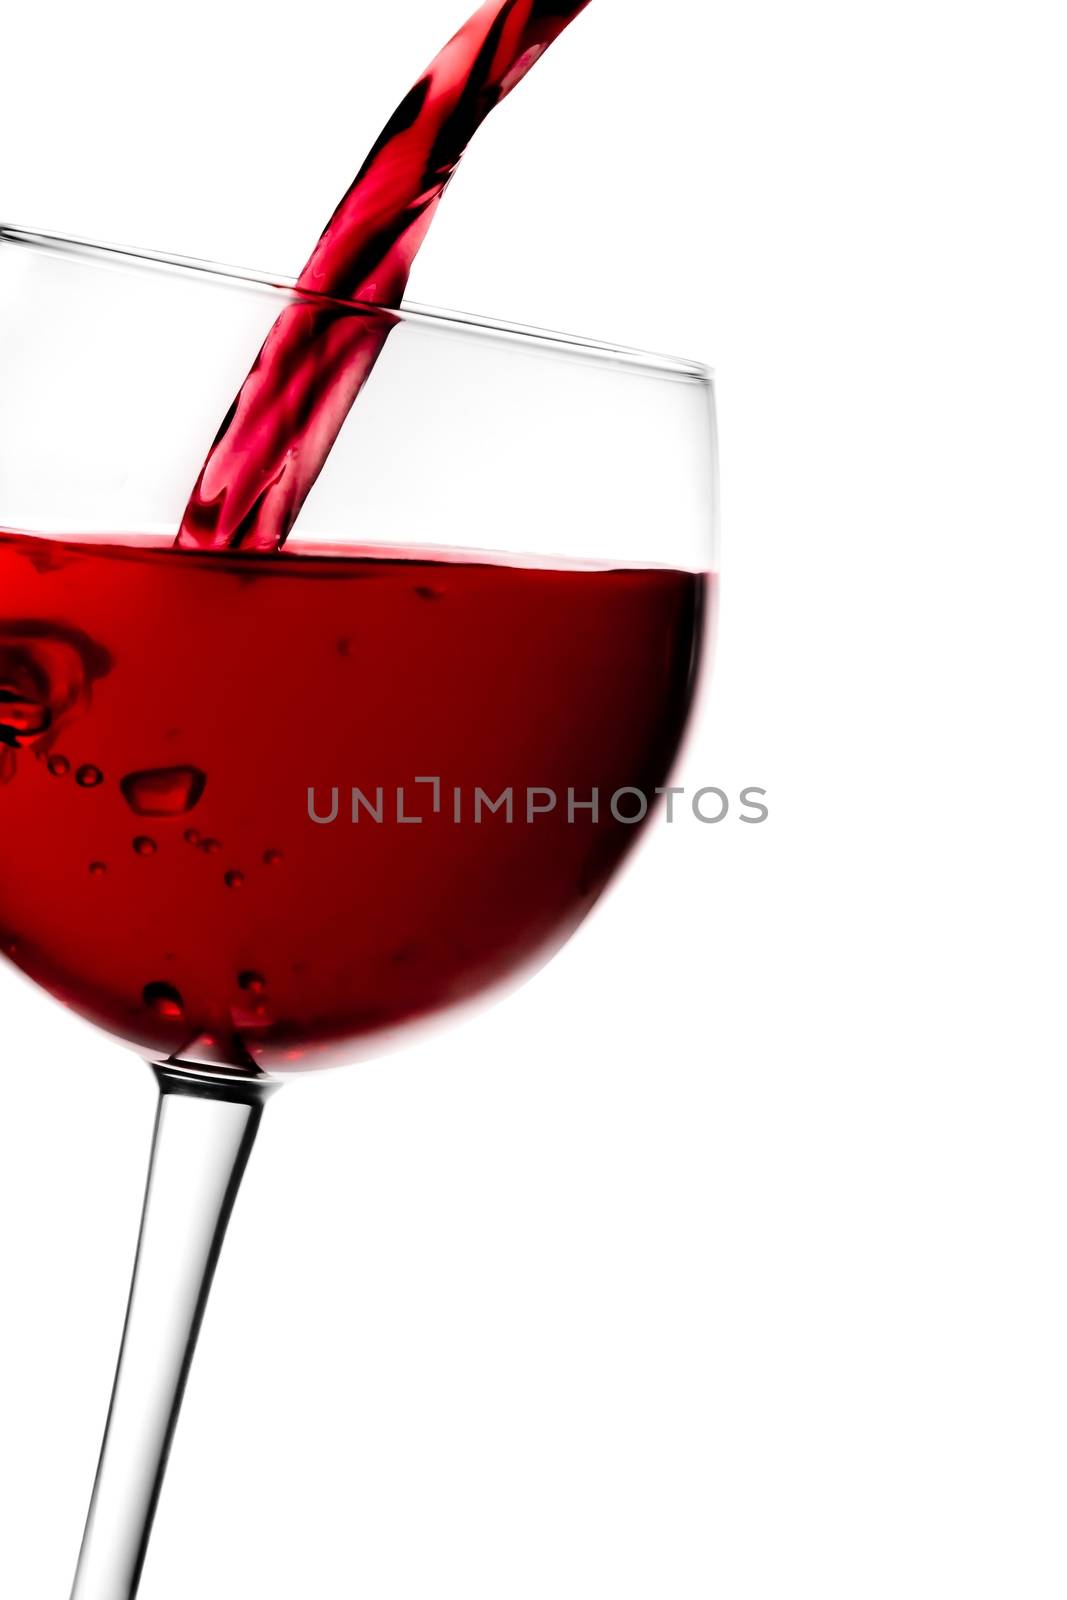 red wine pouring into half glass tilted with space for text  by donfiore